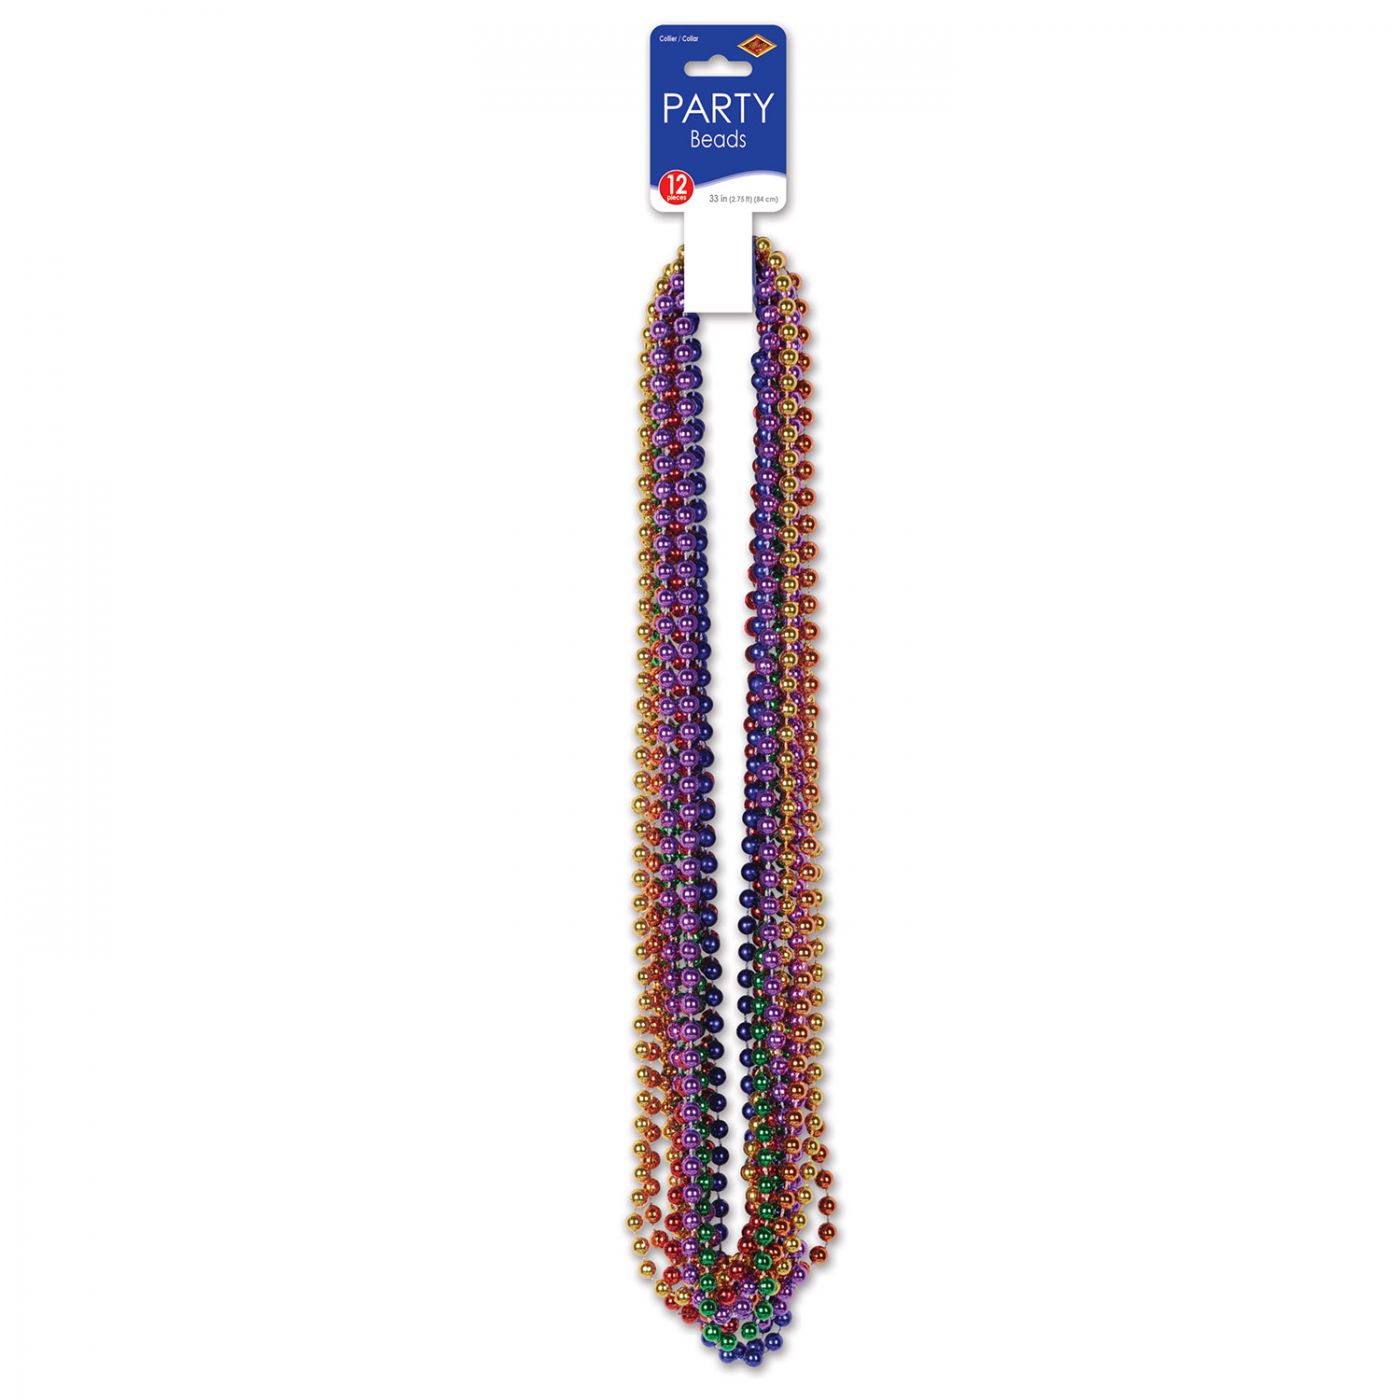 Party Beads - Small Round image